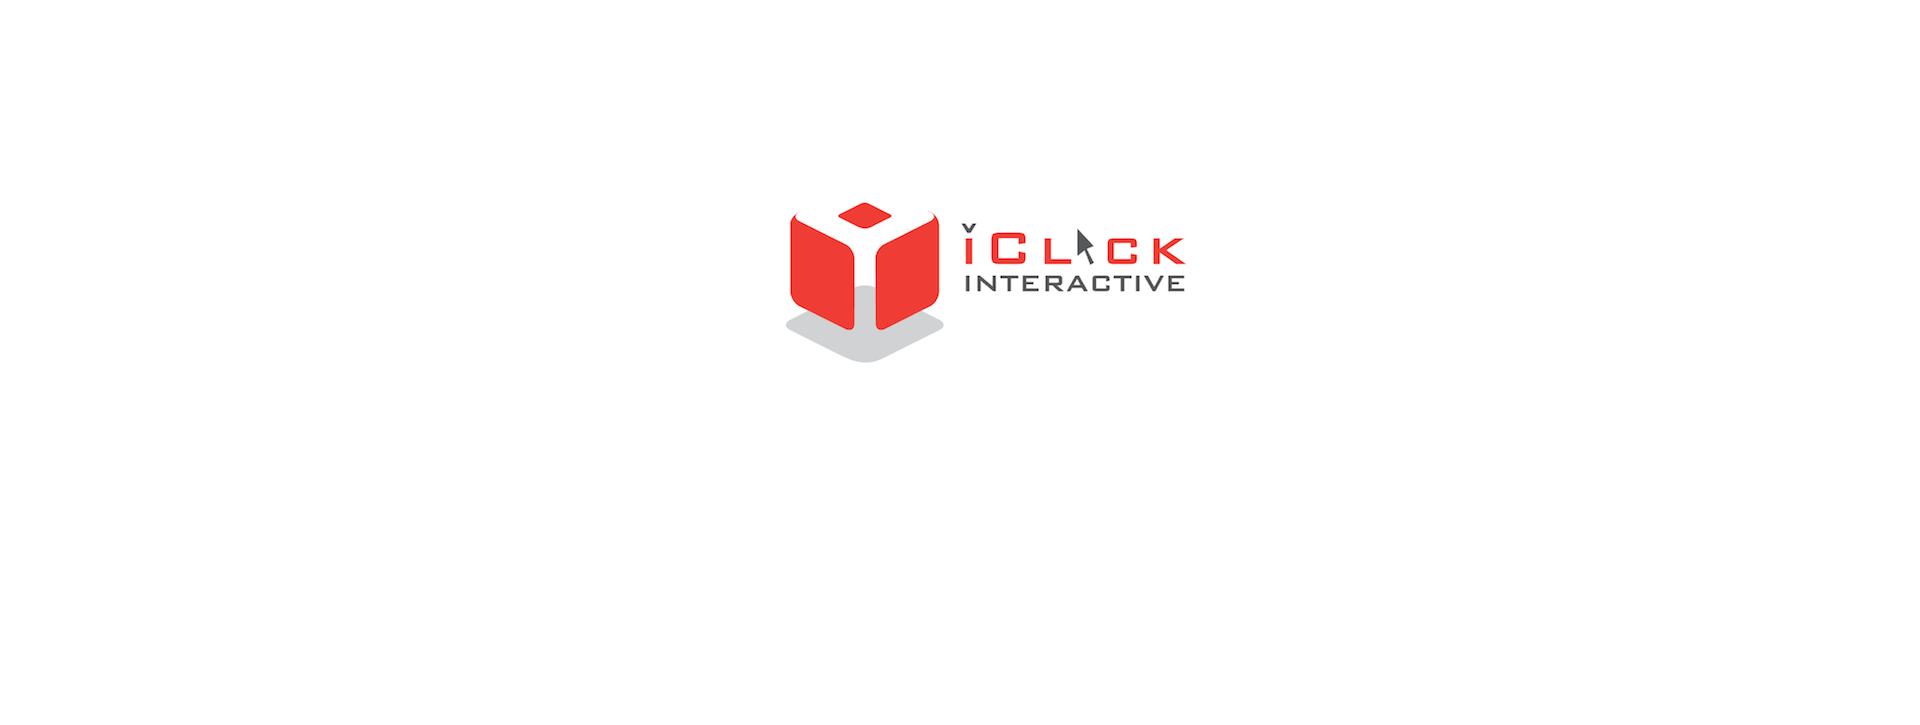 Industry profiles: The iClick Interactive Q&A – ‘Understanding the Chinese consumer’